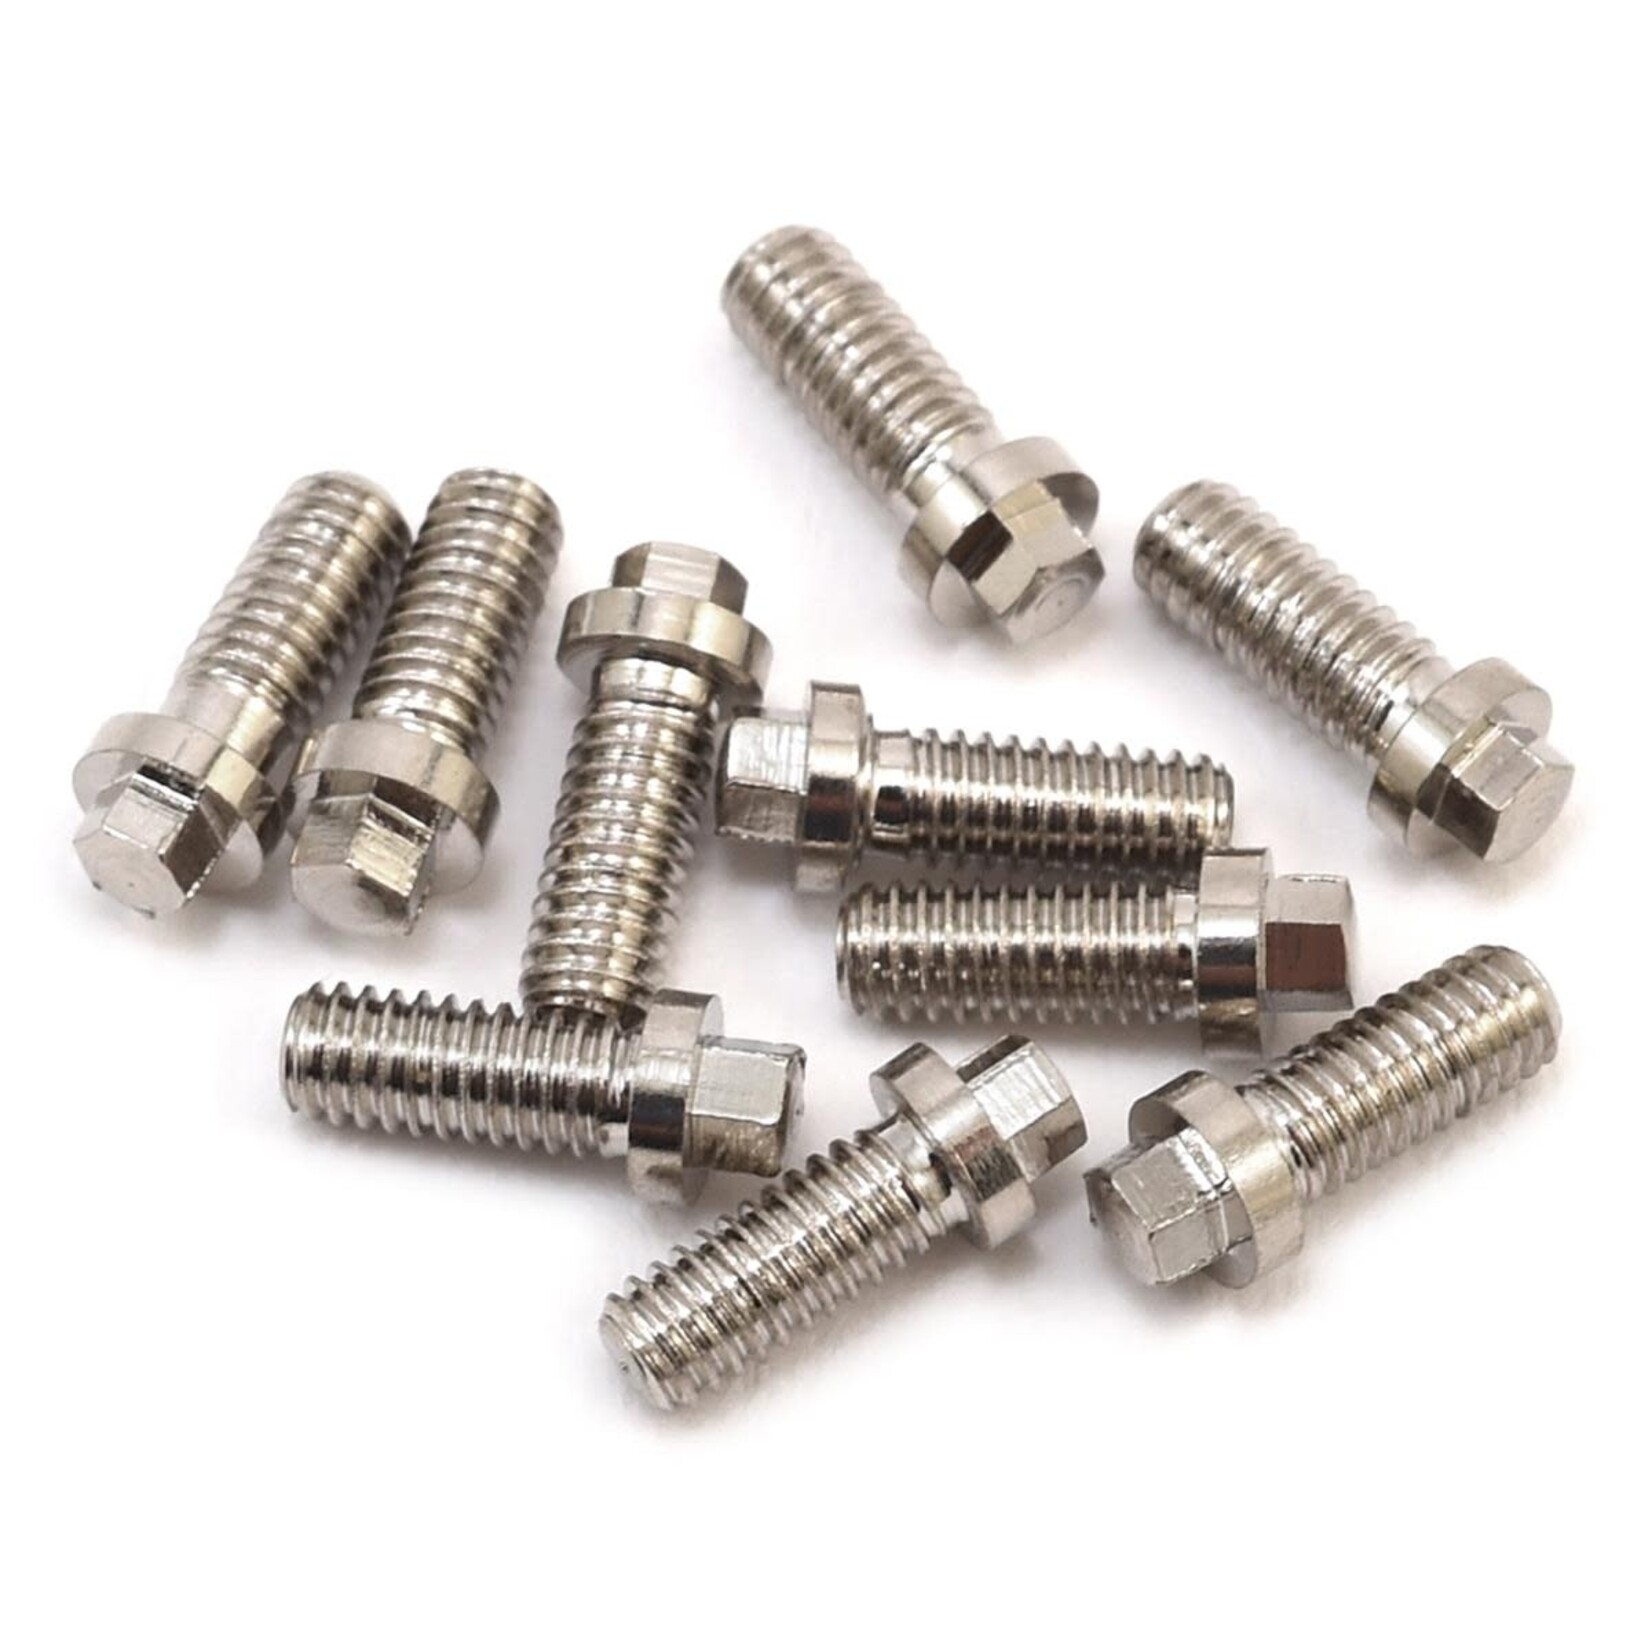 Hot Racing Hot Racing M2.5x6mm Miniature Scale Hex Bolts (10) #BLWS25H06